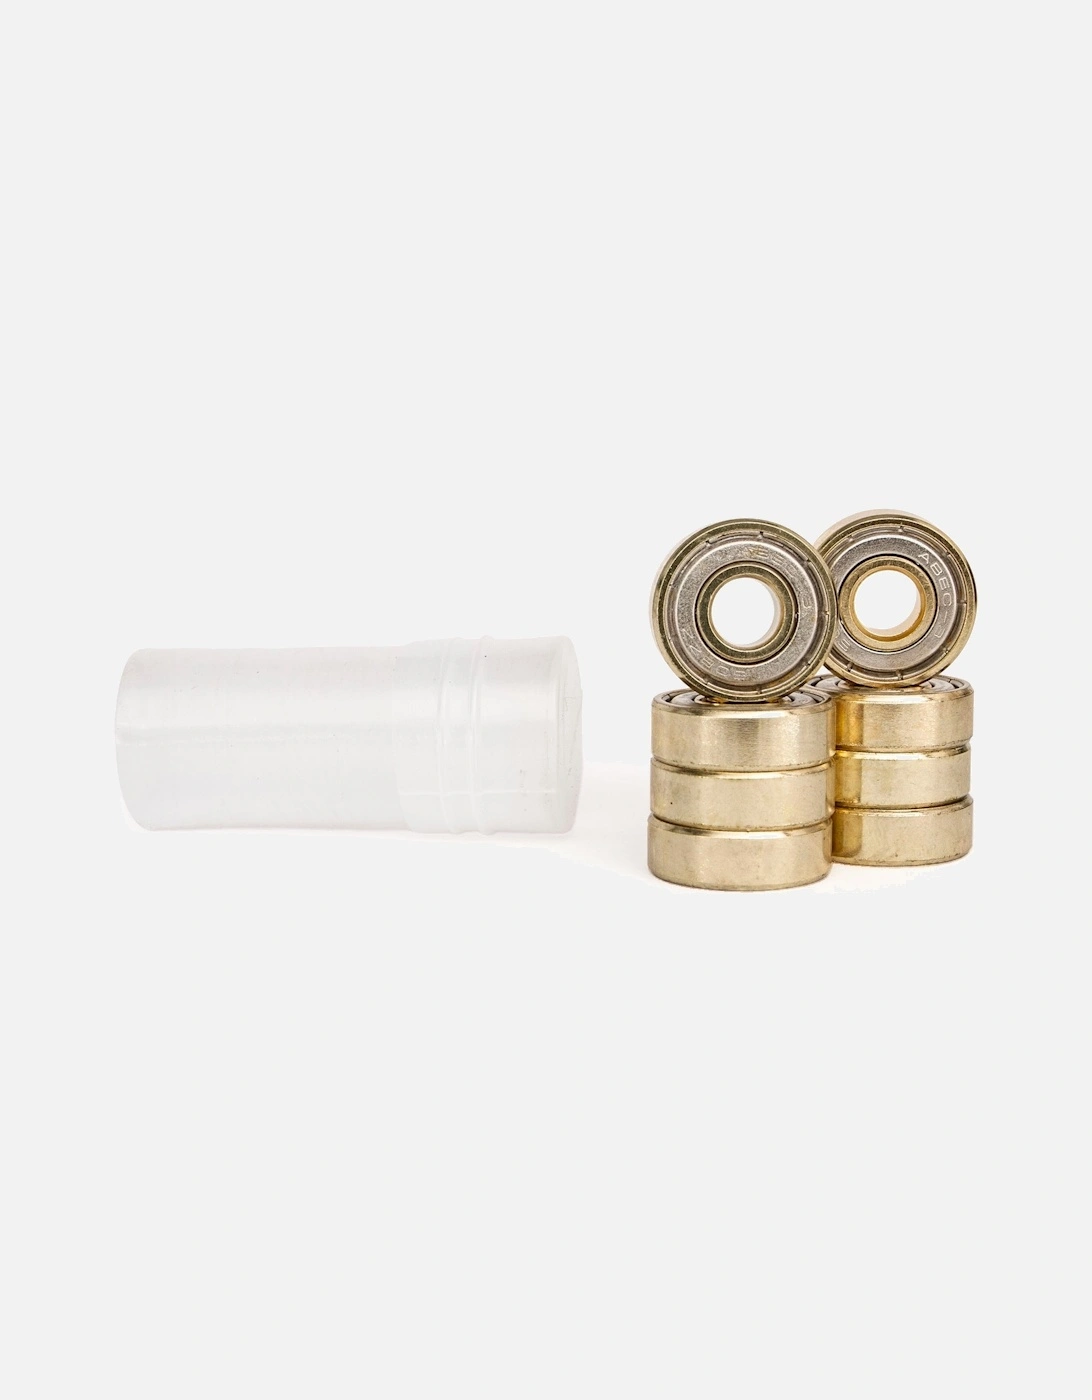 Abec 3 Chrome Goldies Bearings - 8 Pack, 2 of 1